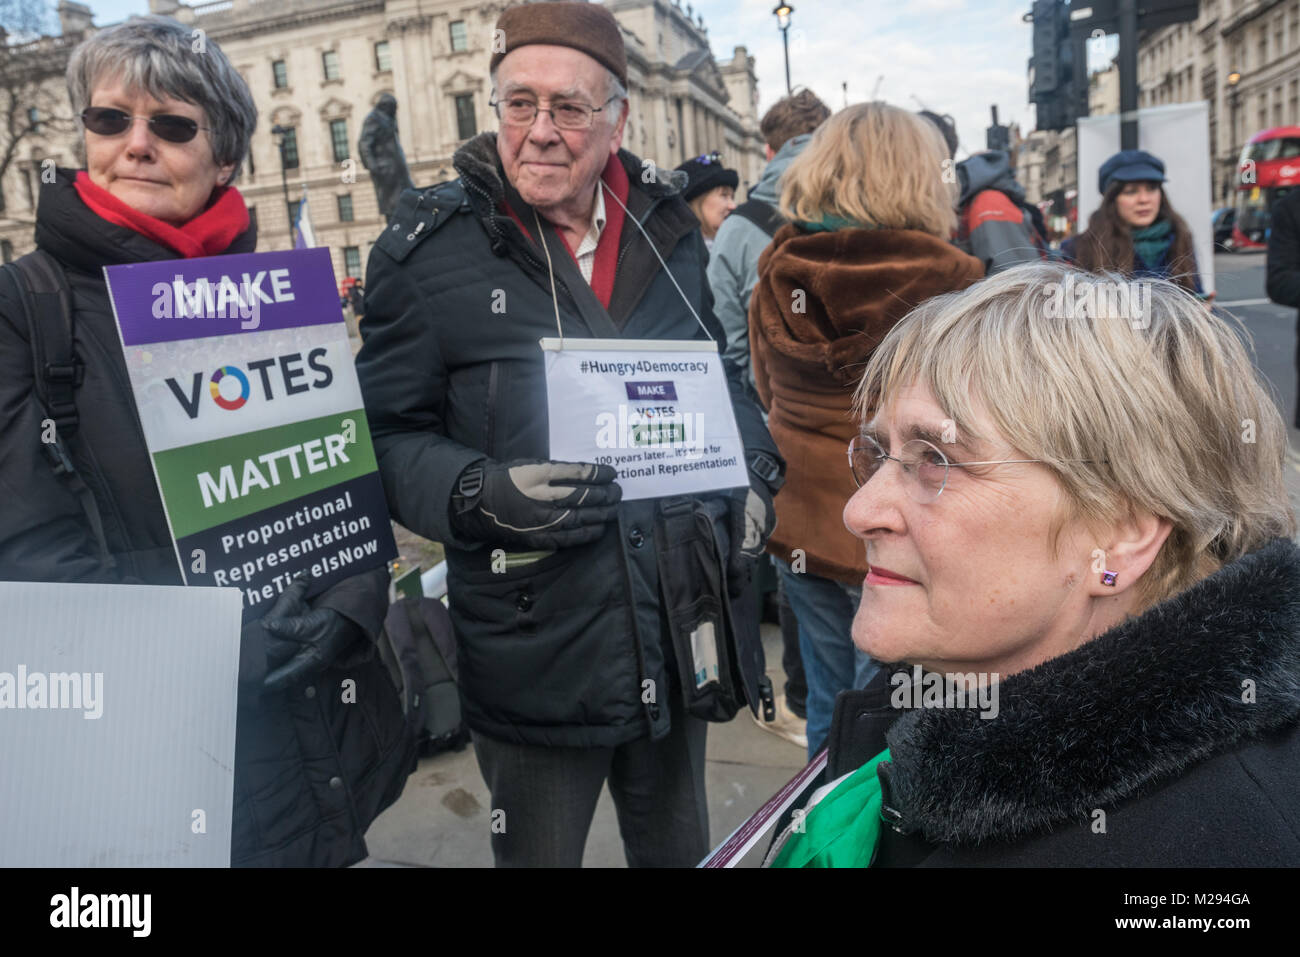 London, UK. 5 February 2018.  Campaigners pose in Parliament Square as hundreds of fair vote campaigners take part in a 24 hour hunger strike organised by Make Votes Matter (MVM) in protest against our dysfunctional electoral system and to urge Proportional Representation.  The event took place on the centenary of the 1918 the Representation of the People Act when for the first time some women and all men over 21 in the UK gained the right to vote. Credit: Peter Marshall/Alamy Live News Stock Photo